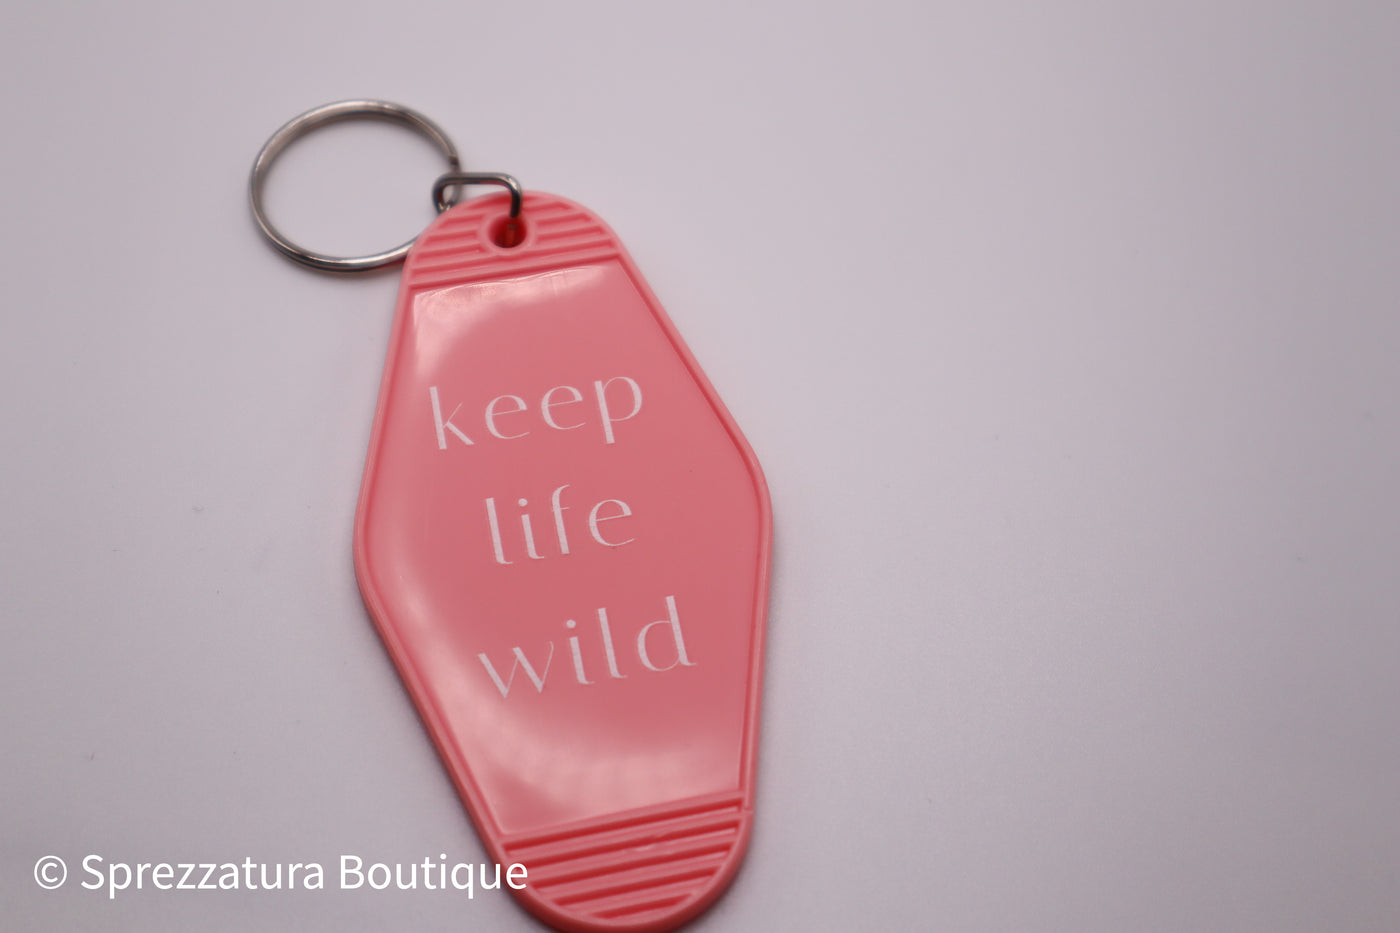 Pink keep life wild keychain. Retro vintage motel style keychain makes a great gift.